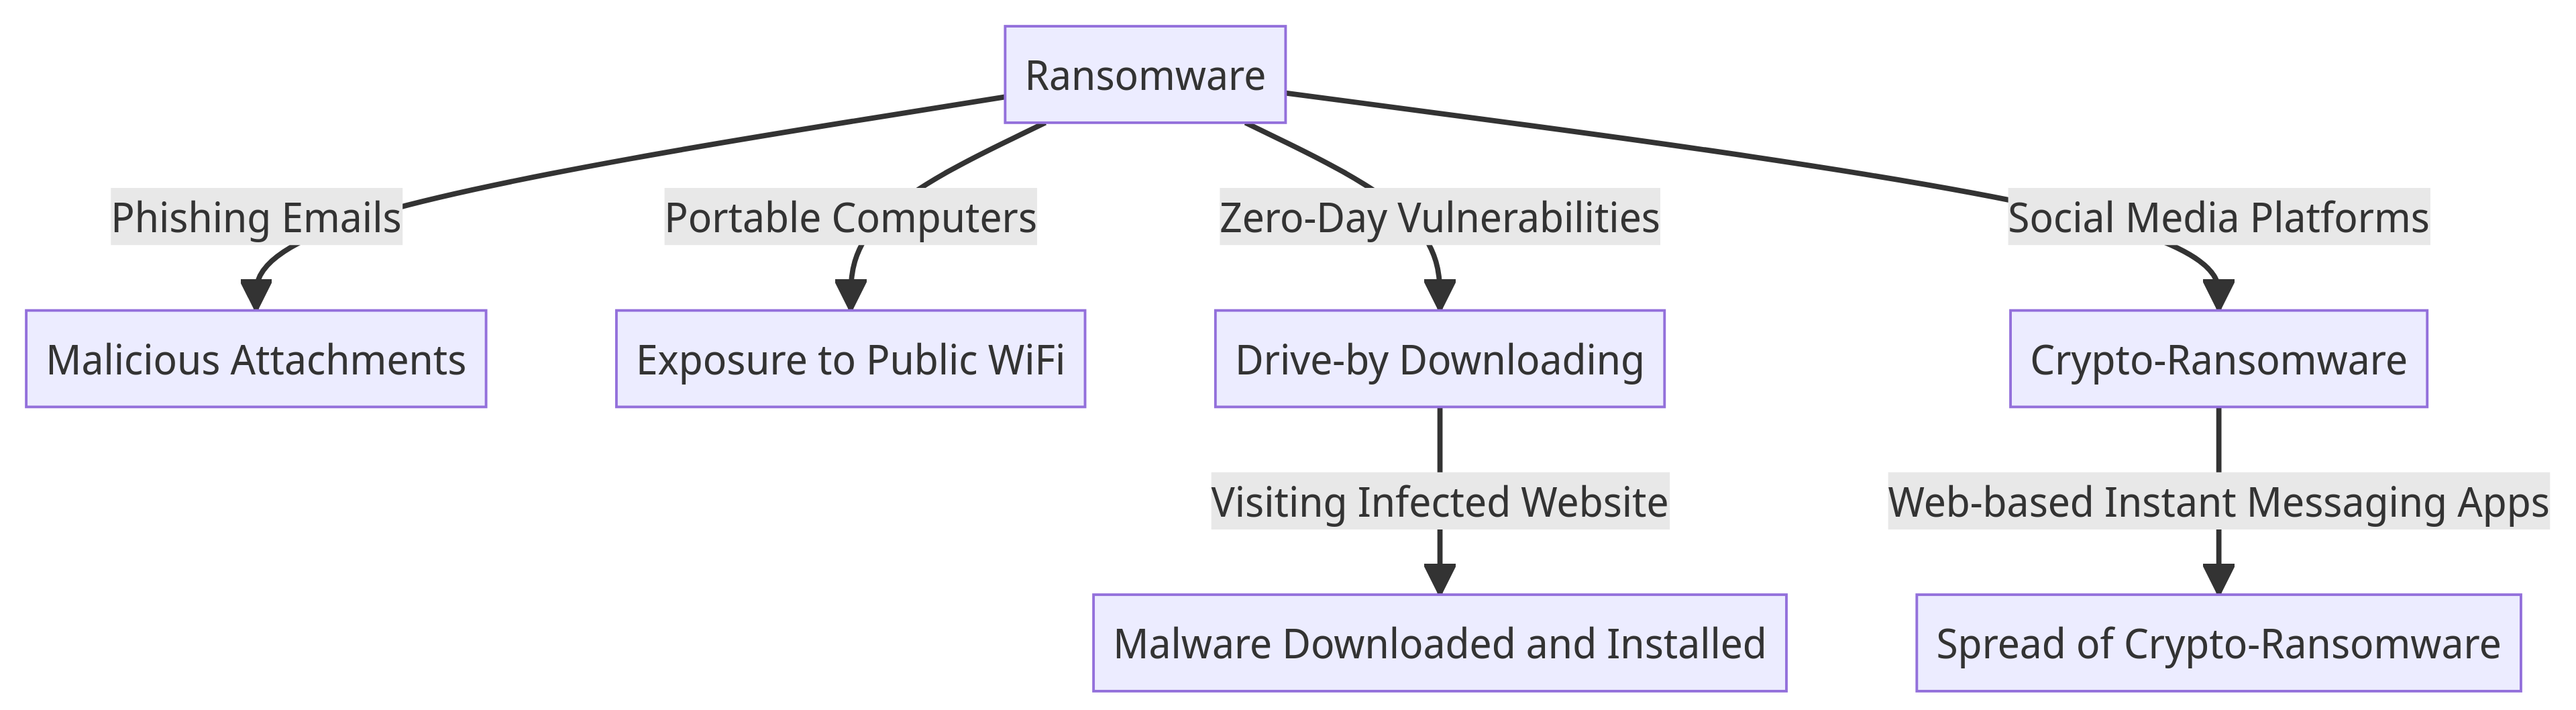 How ransomware can land on endpoints